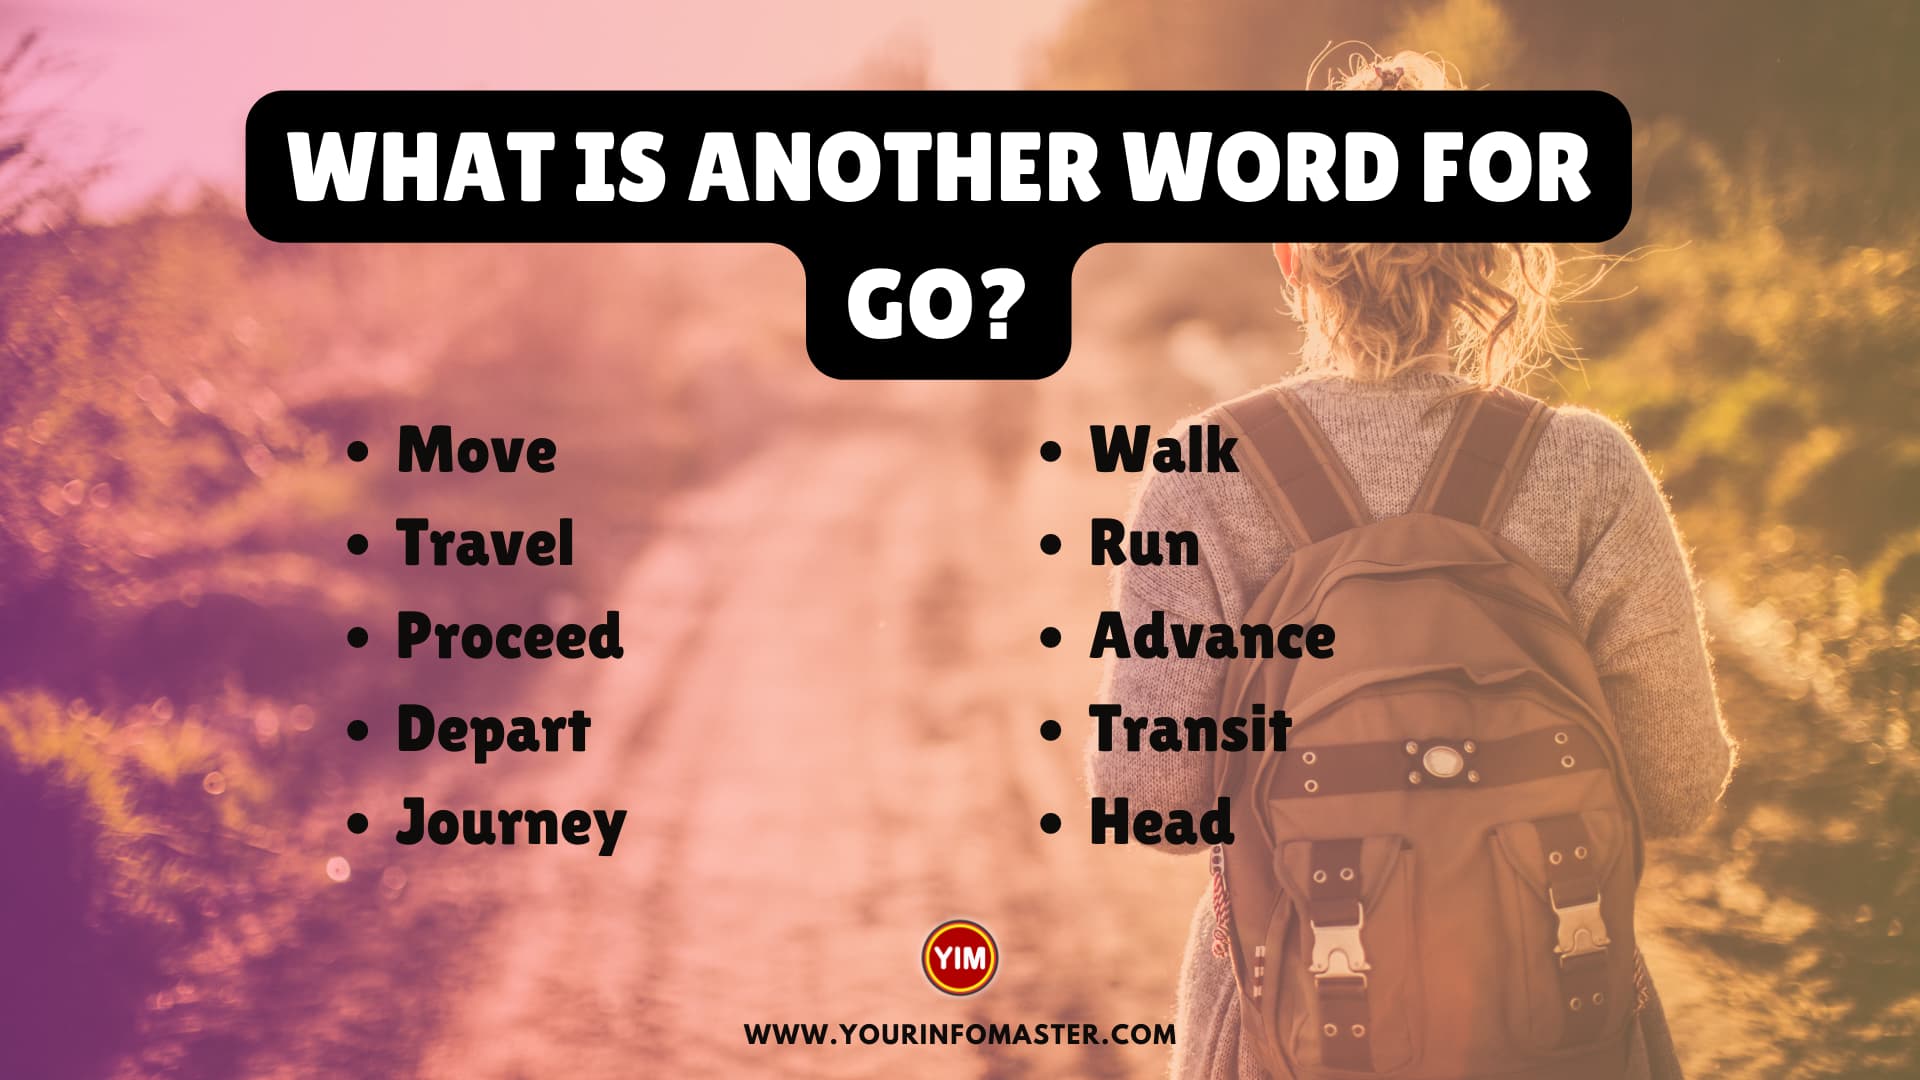 What is another word for Go